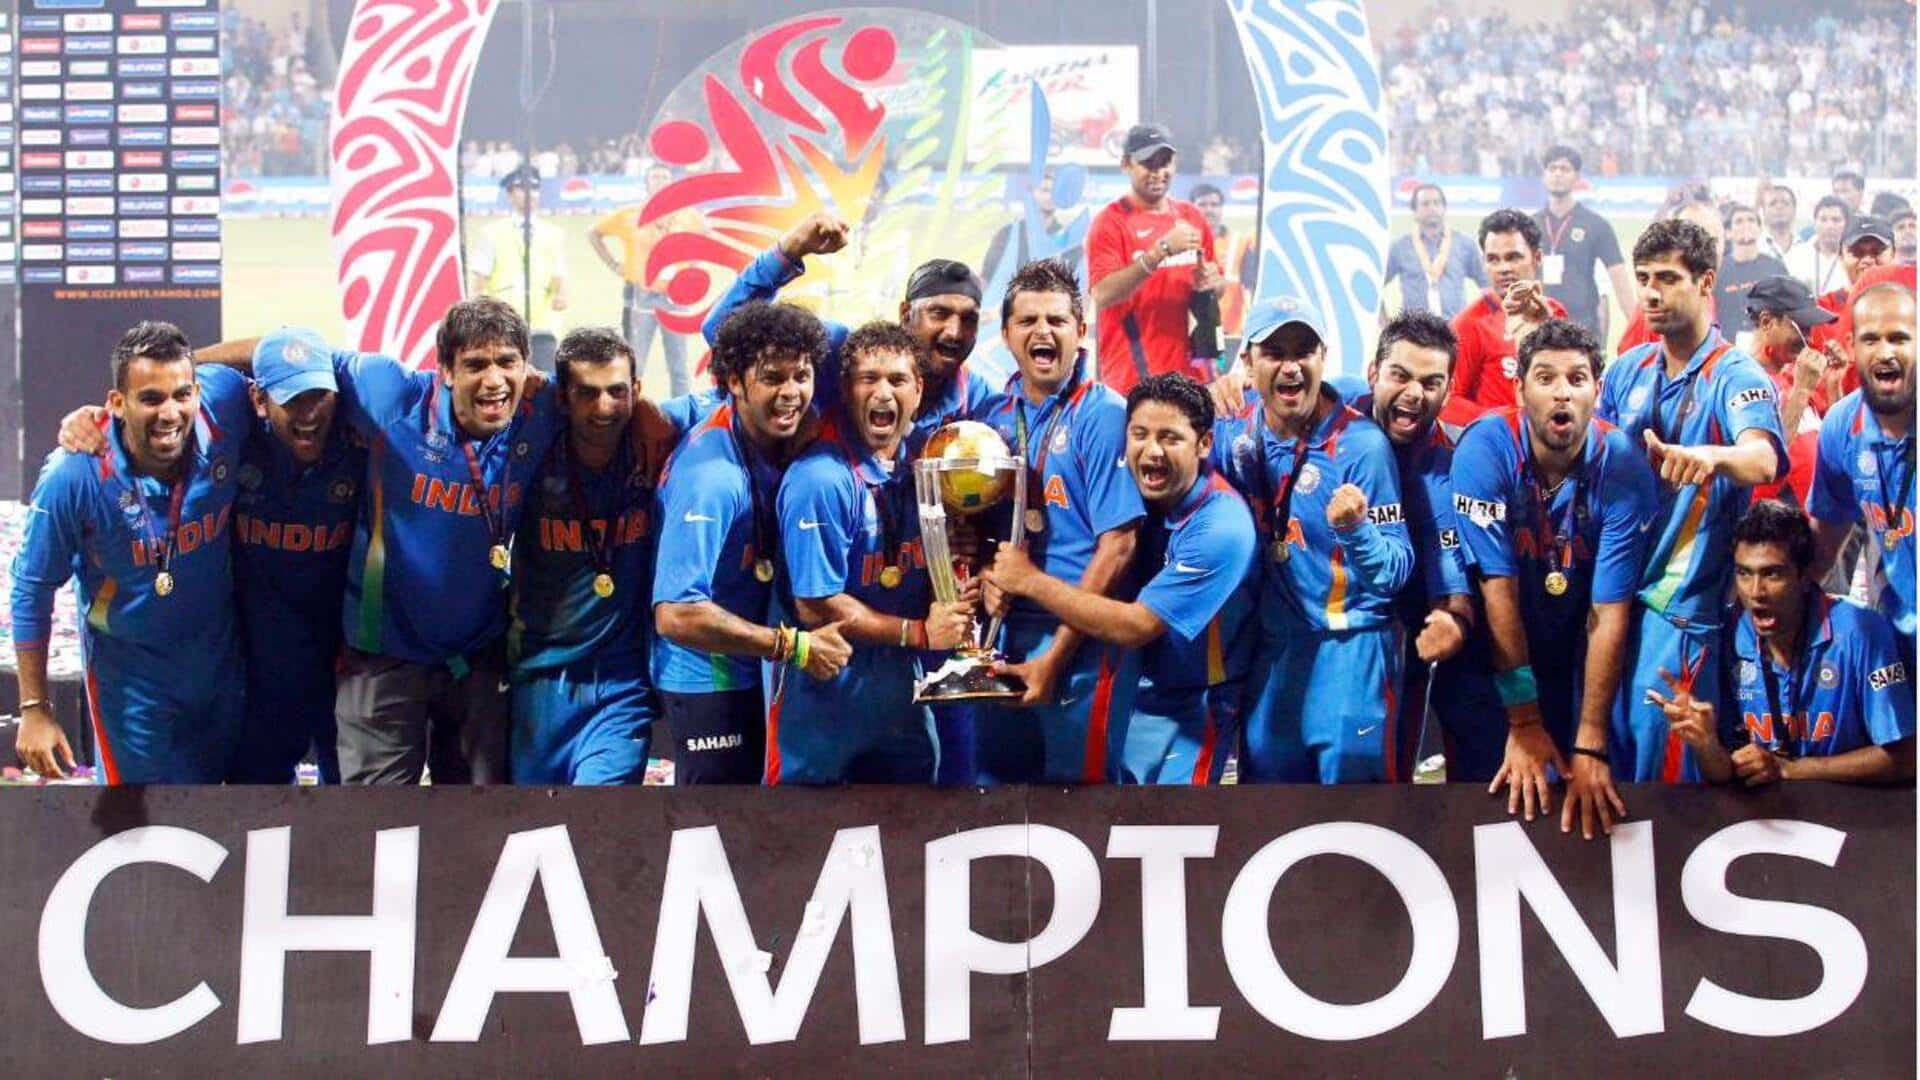 Key learnings from India's 2011 World Cup-winning campaign